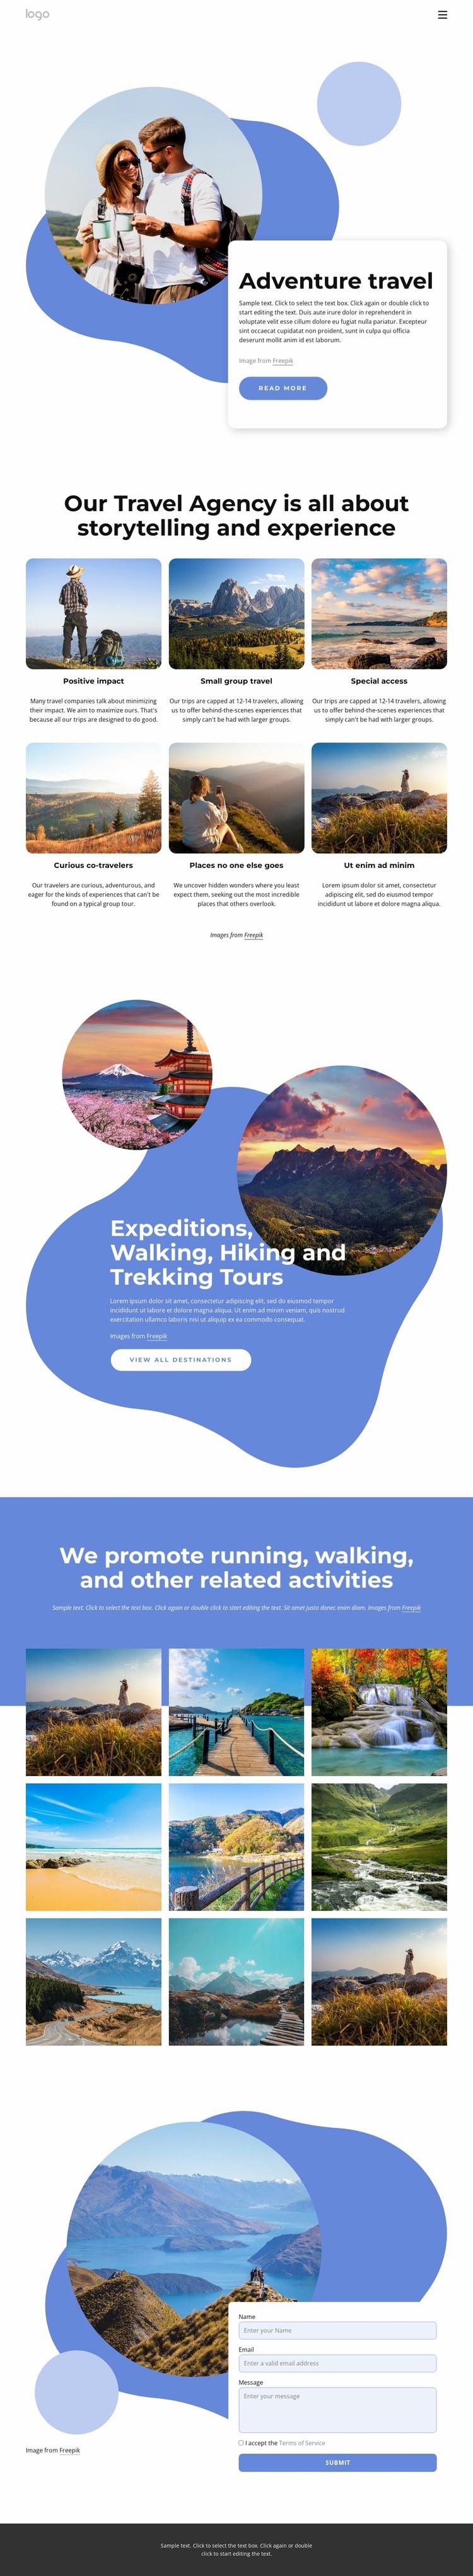 Agency specializing in luxury adventure travel Squarespace Template Alternative